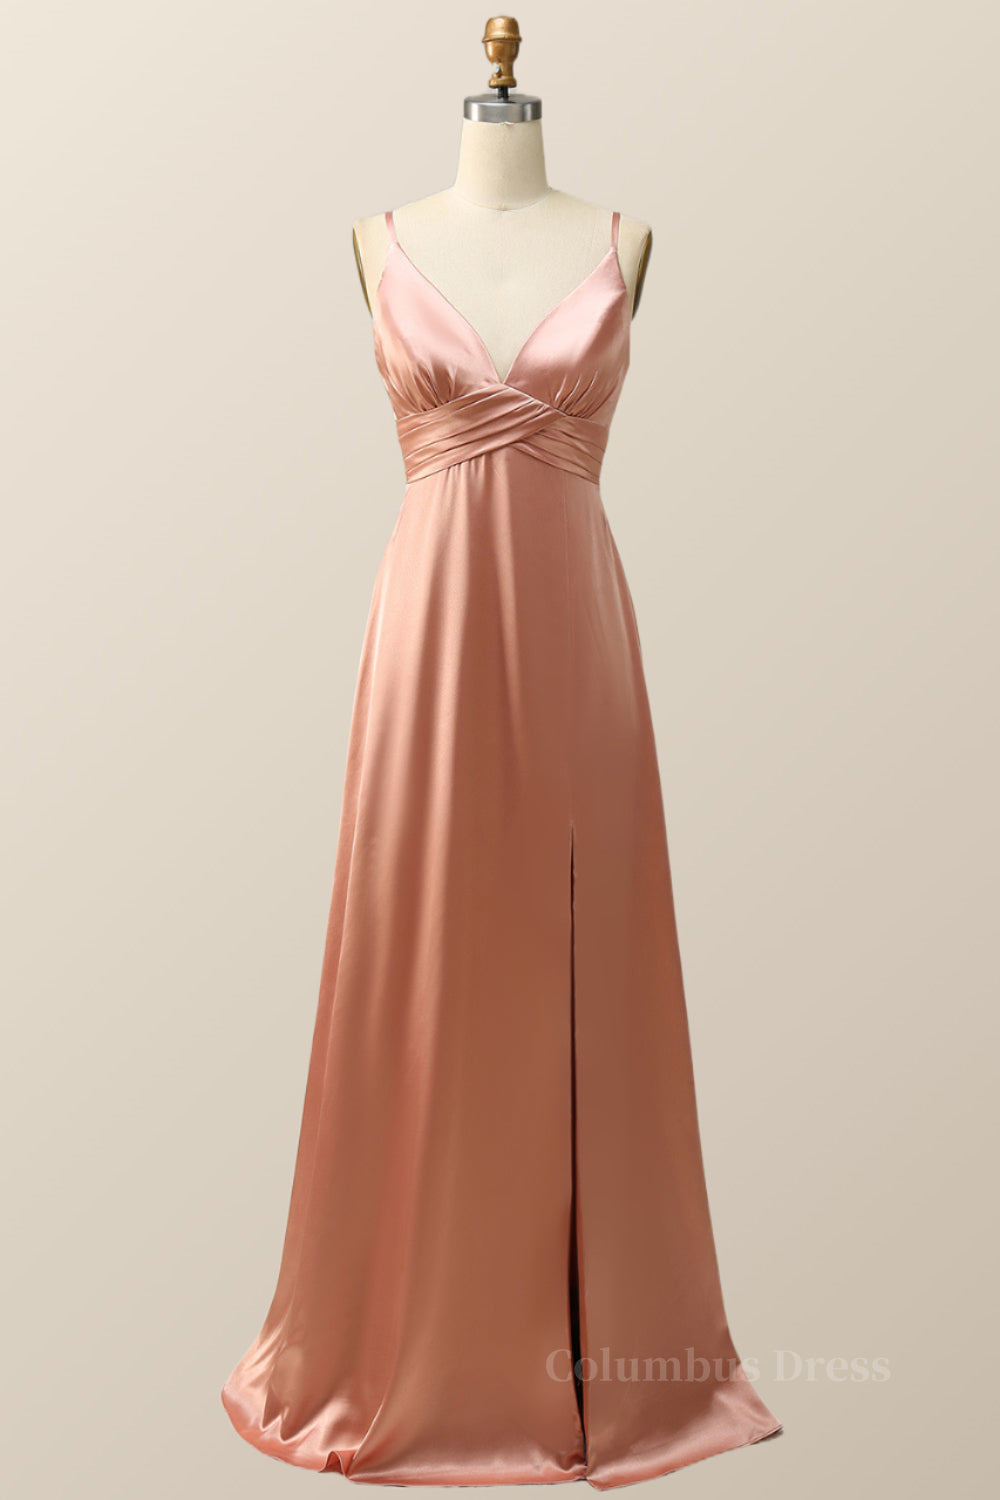 Empire Blush Silk A-line Long Corset Bridesmaid Dress with Slit Gowns, Prom Dress Inspo